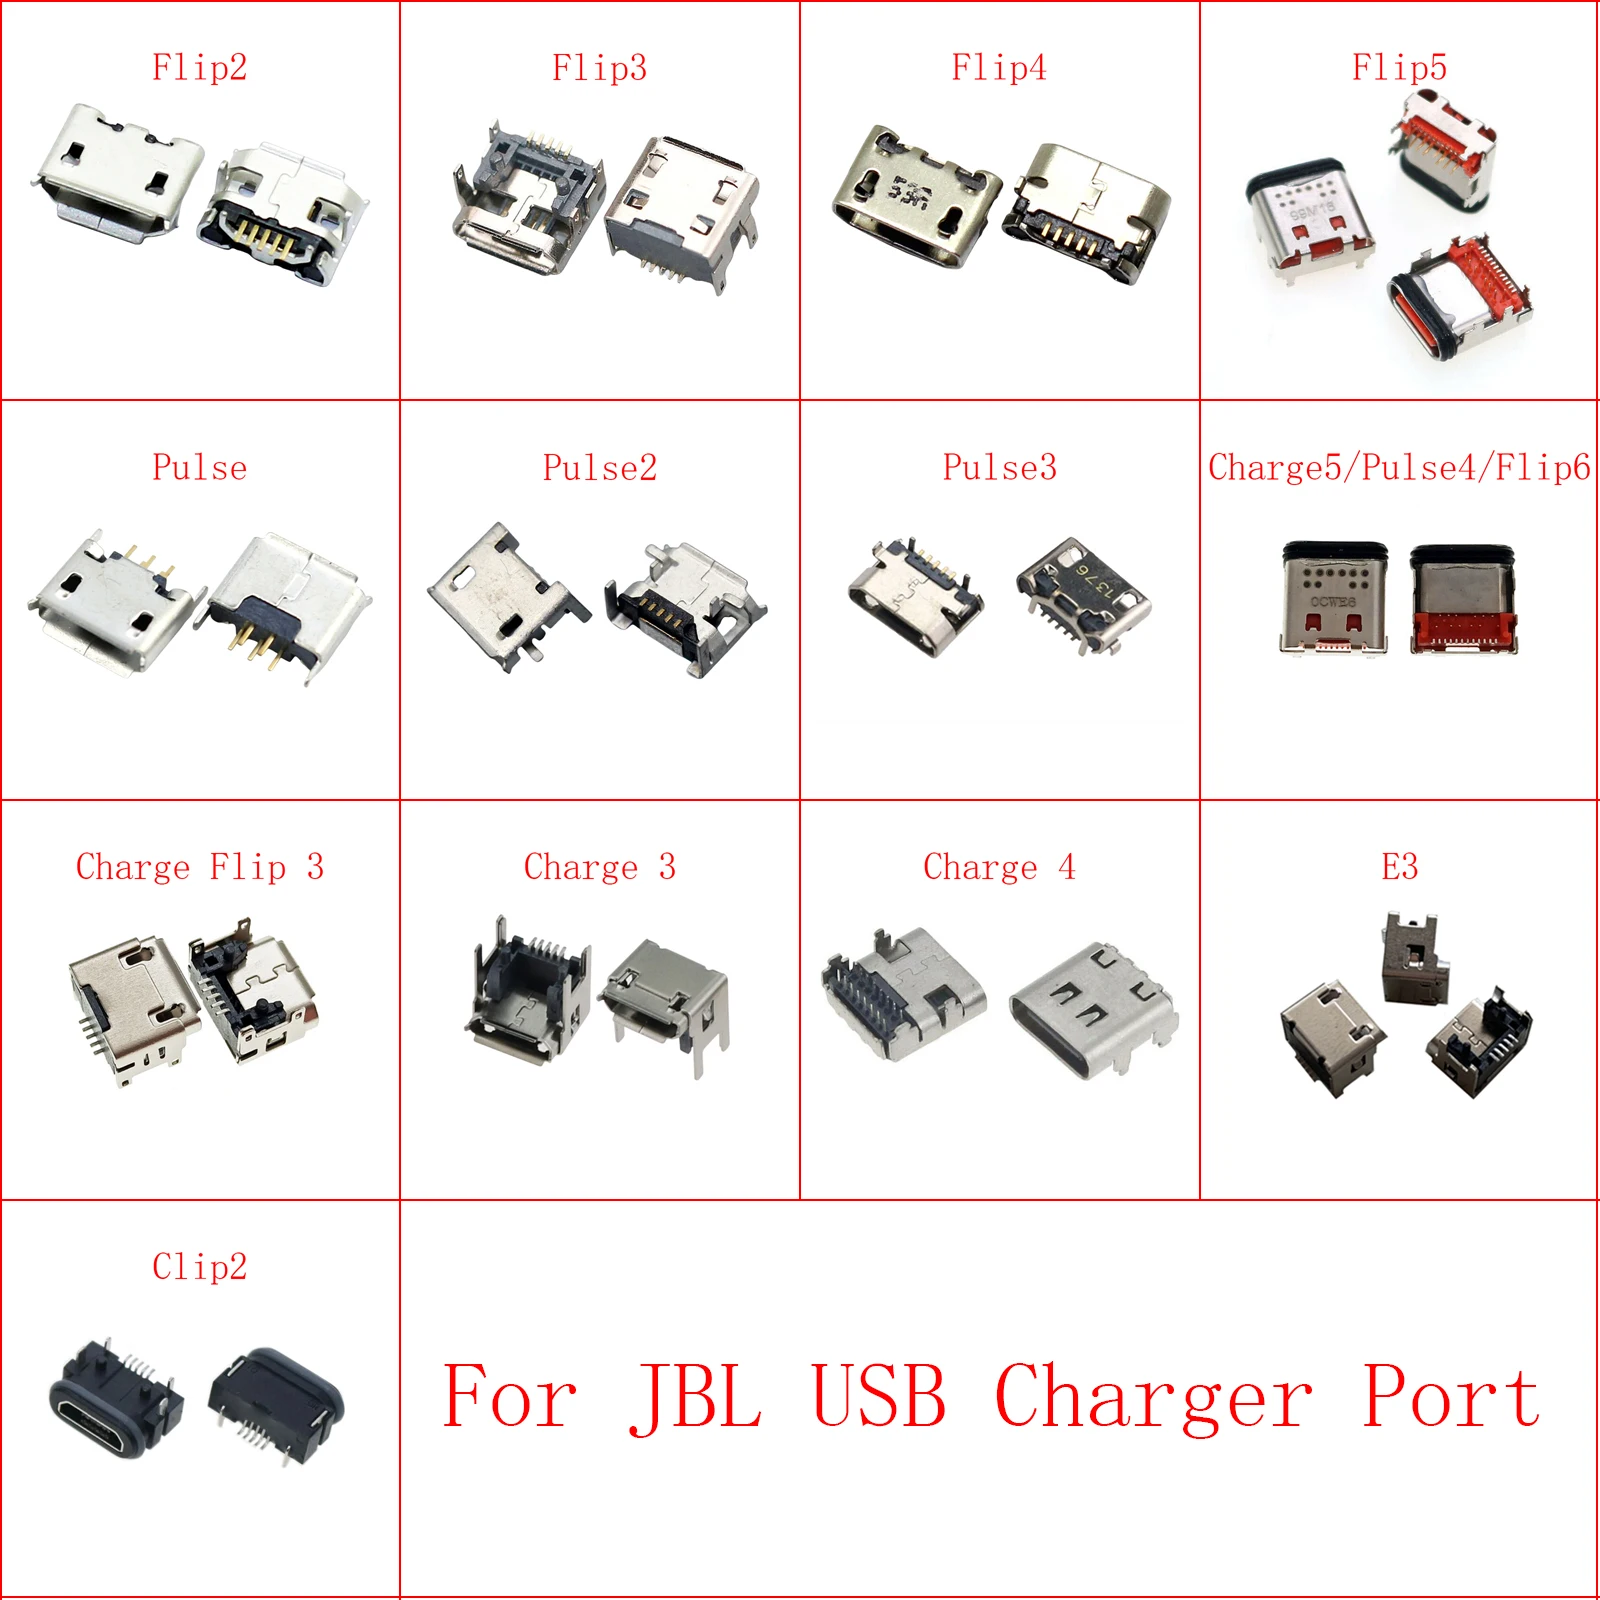 

10pcs Micro USB Charging Connector For JBL Charge 5/Flip 6 5 4 3 Pulse 4 3/Extreme/Flip6 Clip 2 4 E3 Go Charger Socket Data Port